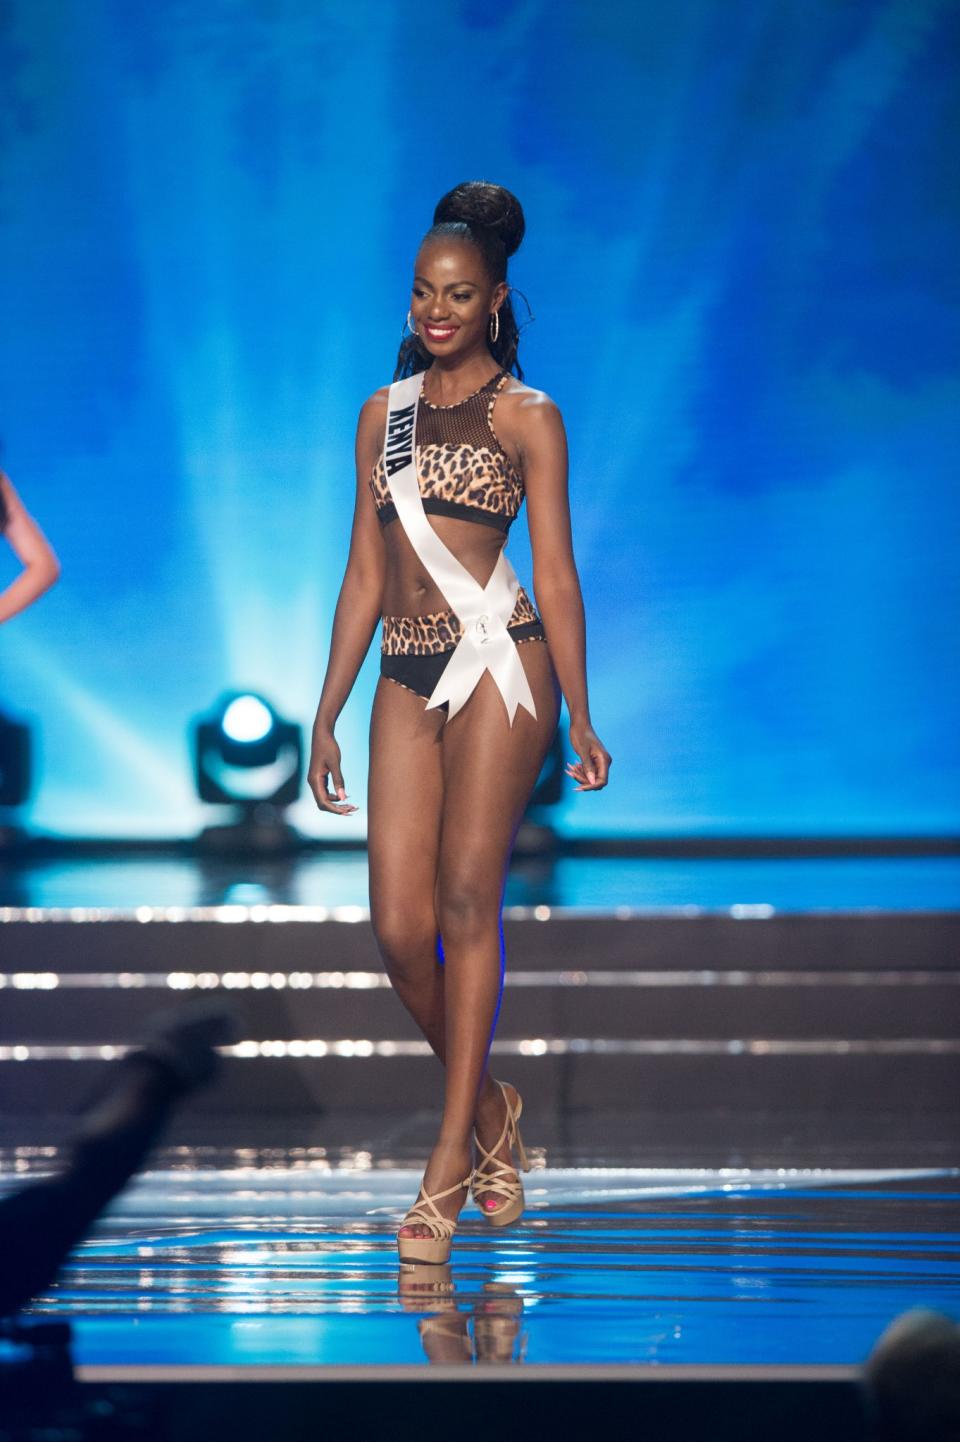 Miss France wins 65th Miss Universe pageant